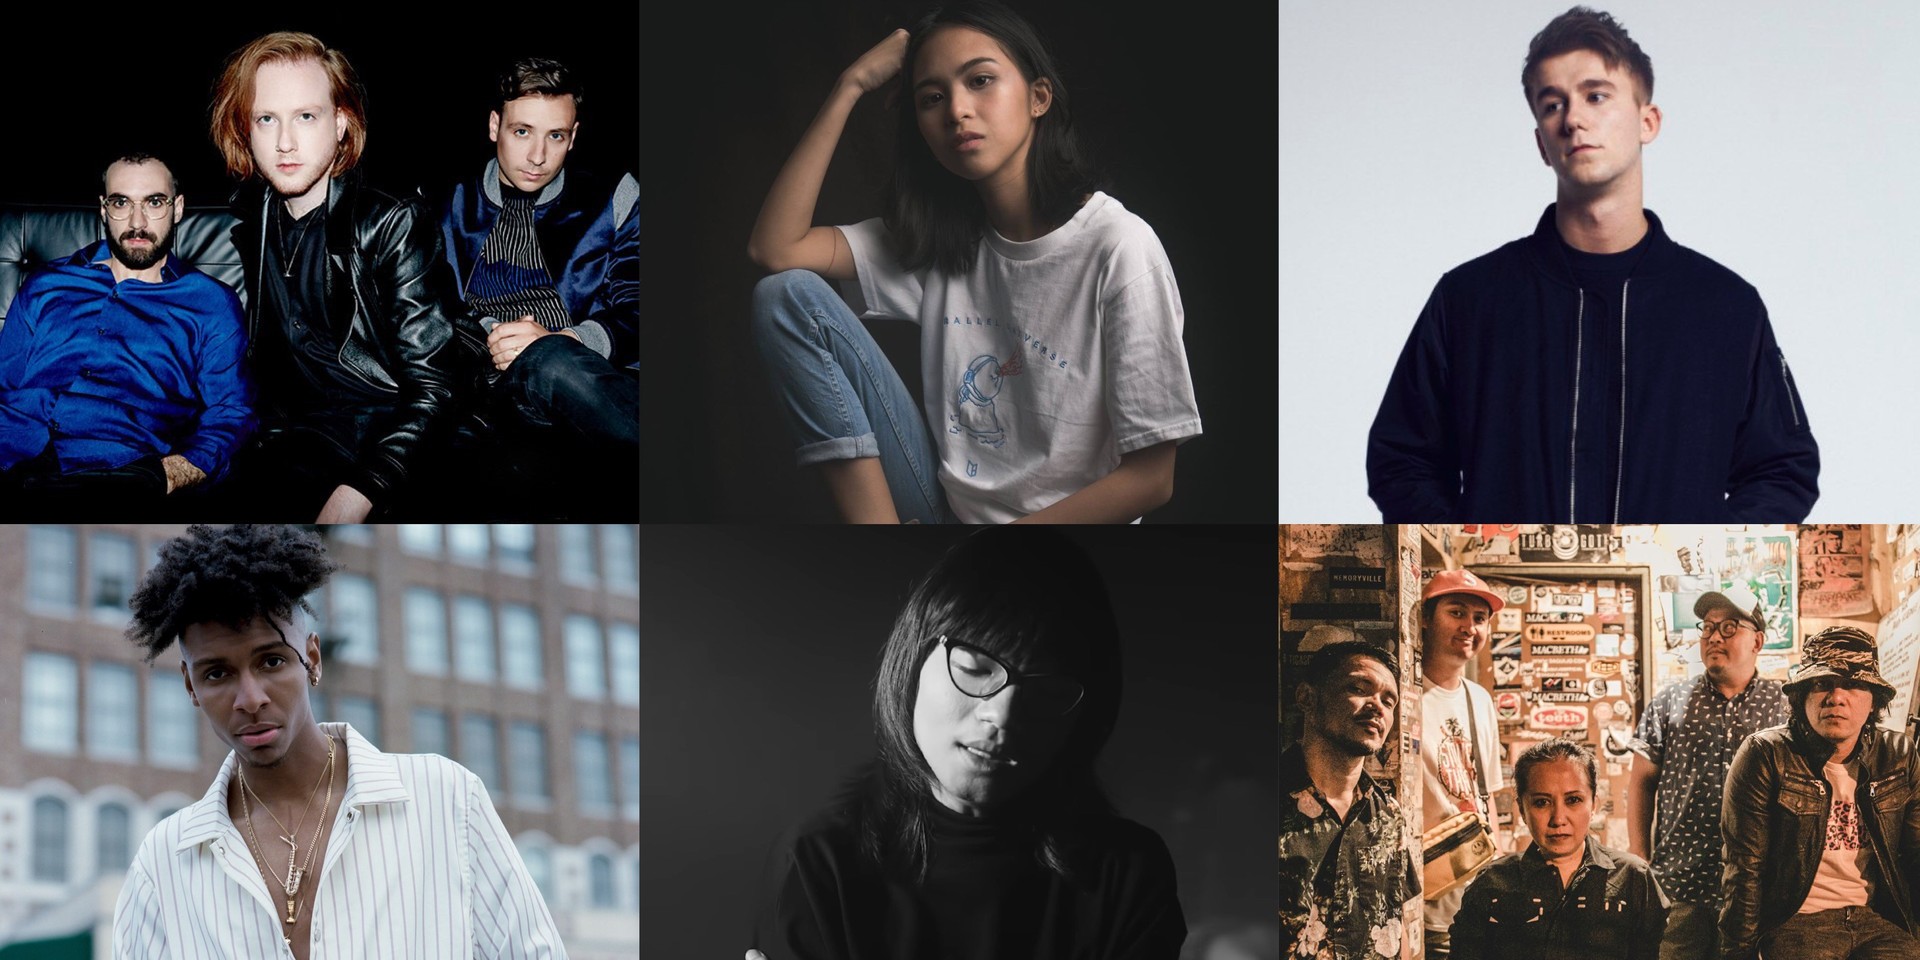 Wanderland unveils phase one lineup: Two Door Cinema Club, UNIQUE, Masego, and more